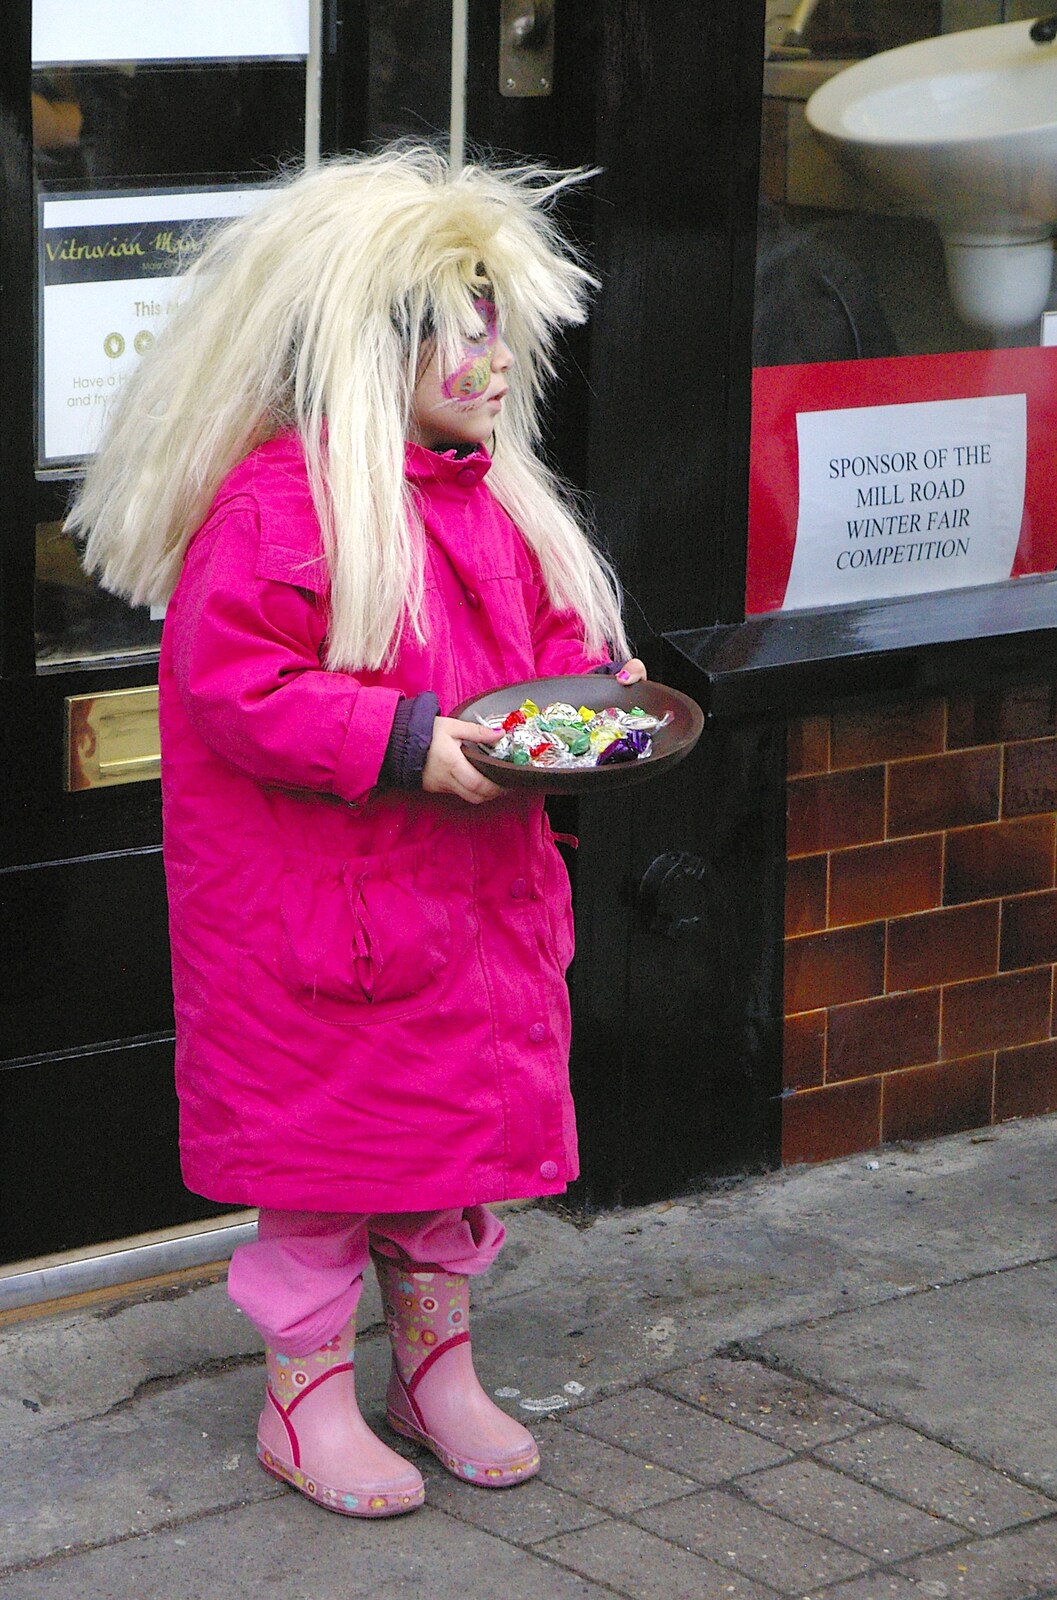 A small girl in a big wig from The Winter Fair, Mill Road, Cambridge - 2nd December 2006